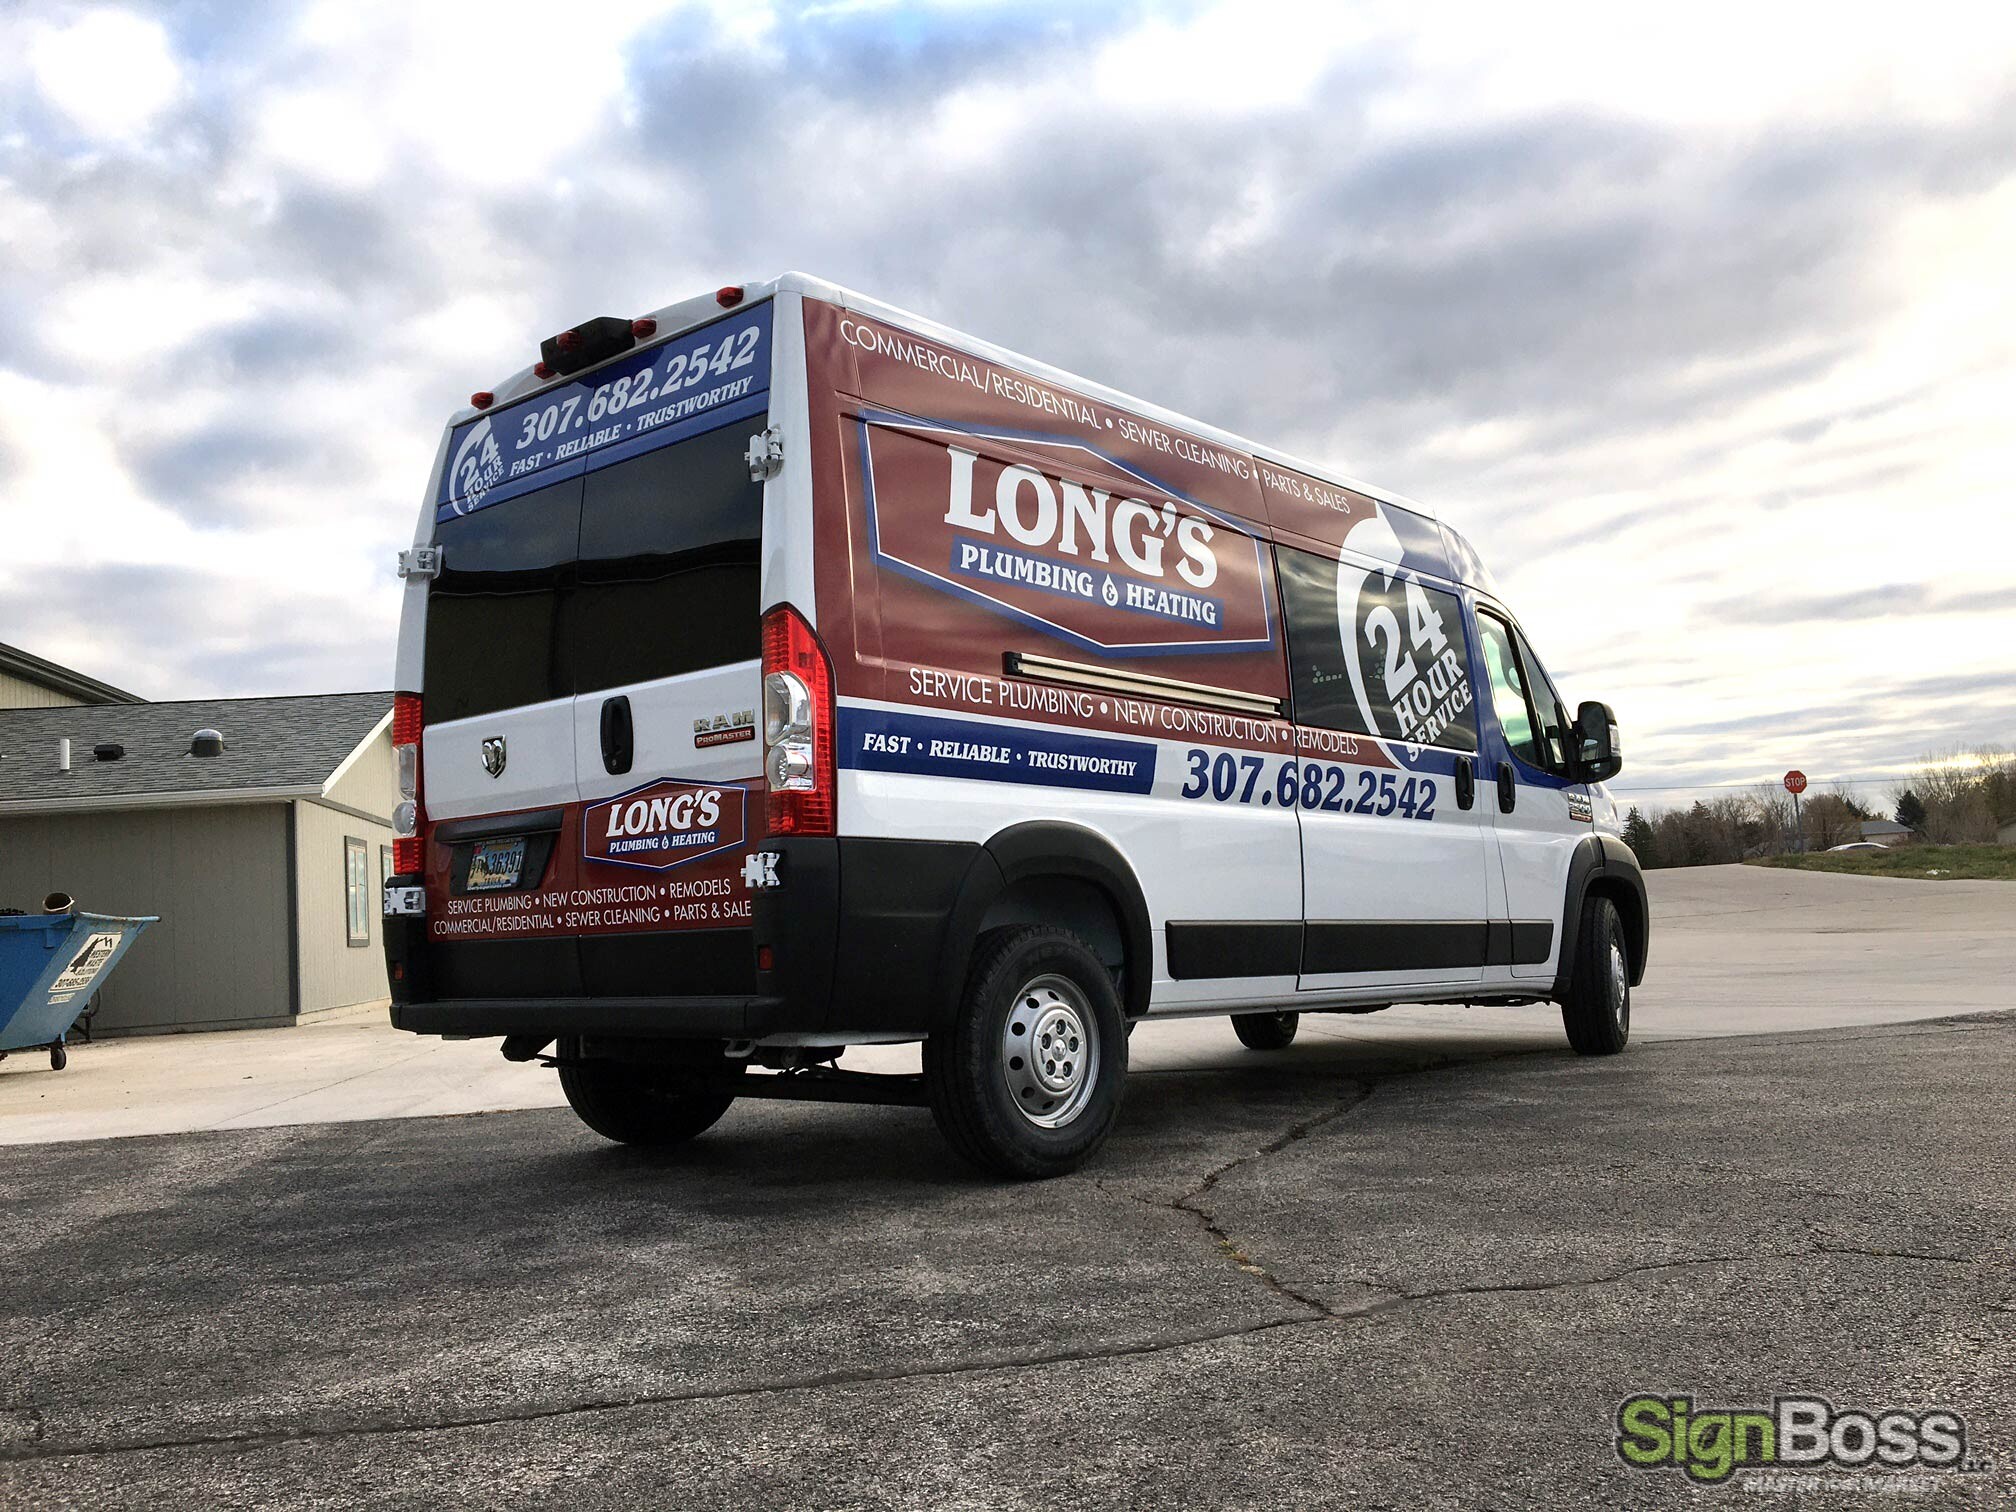 Mobile Marketing with Van Wraps in Gillette WY